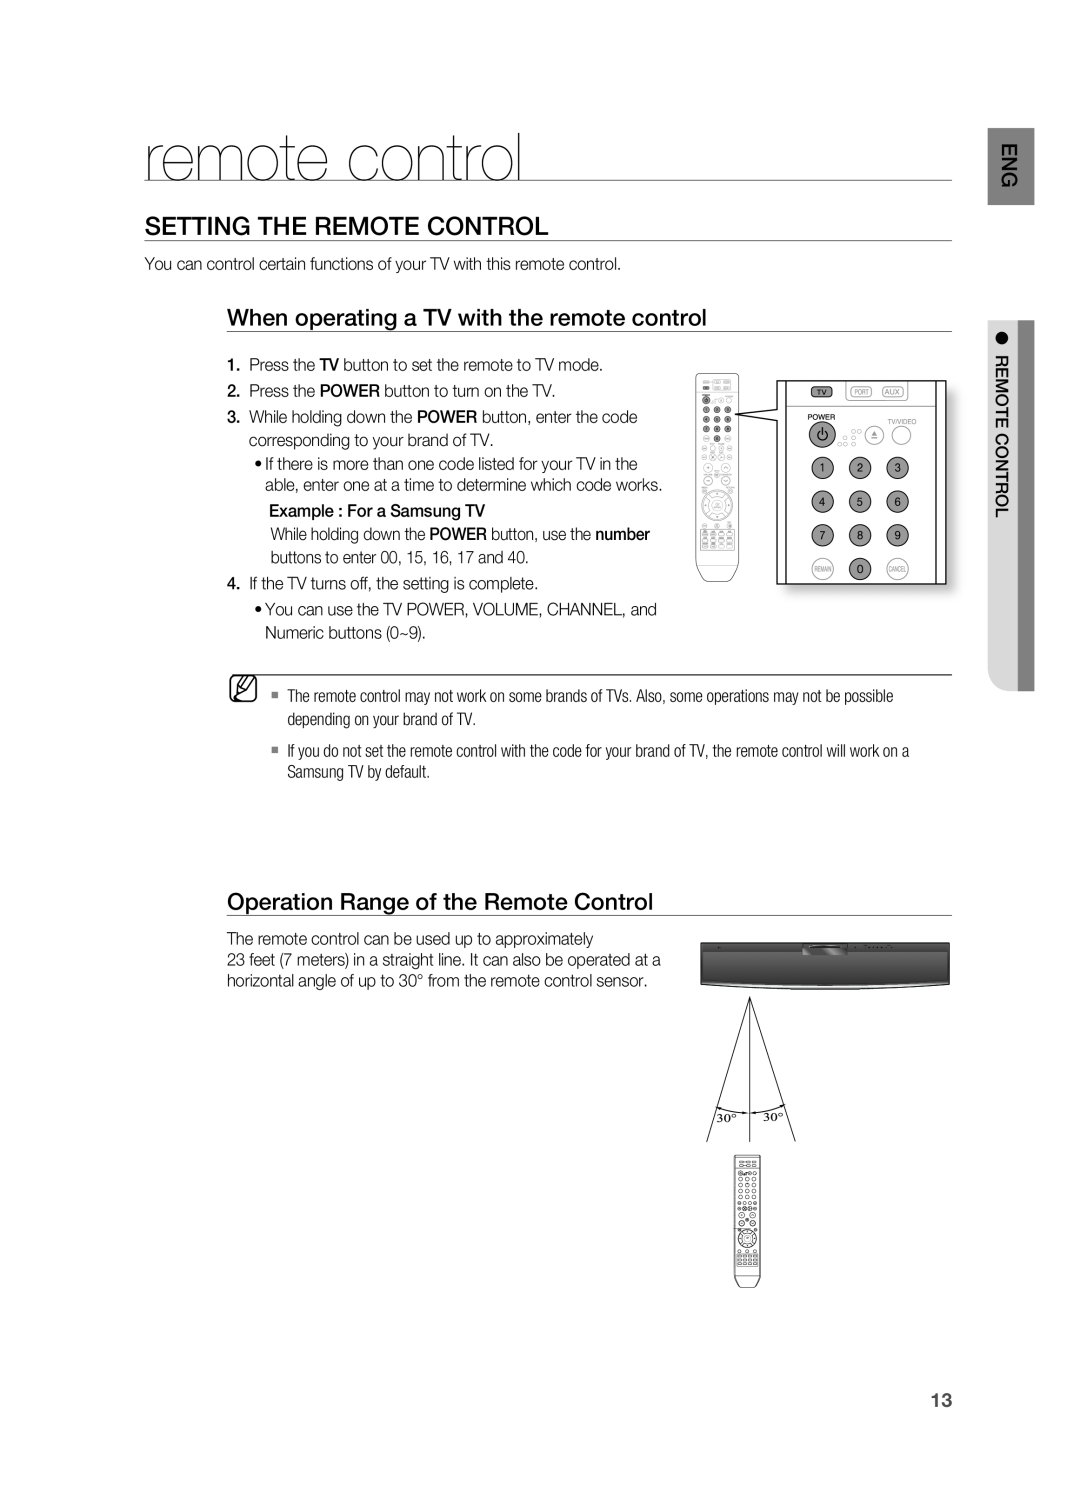 Samsung HT-X810 user manual SETTING THE rEMOTE CONTrOl, When operating a TV with the remote control 